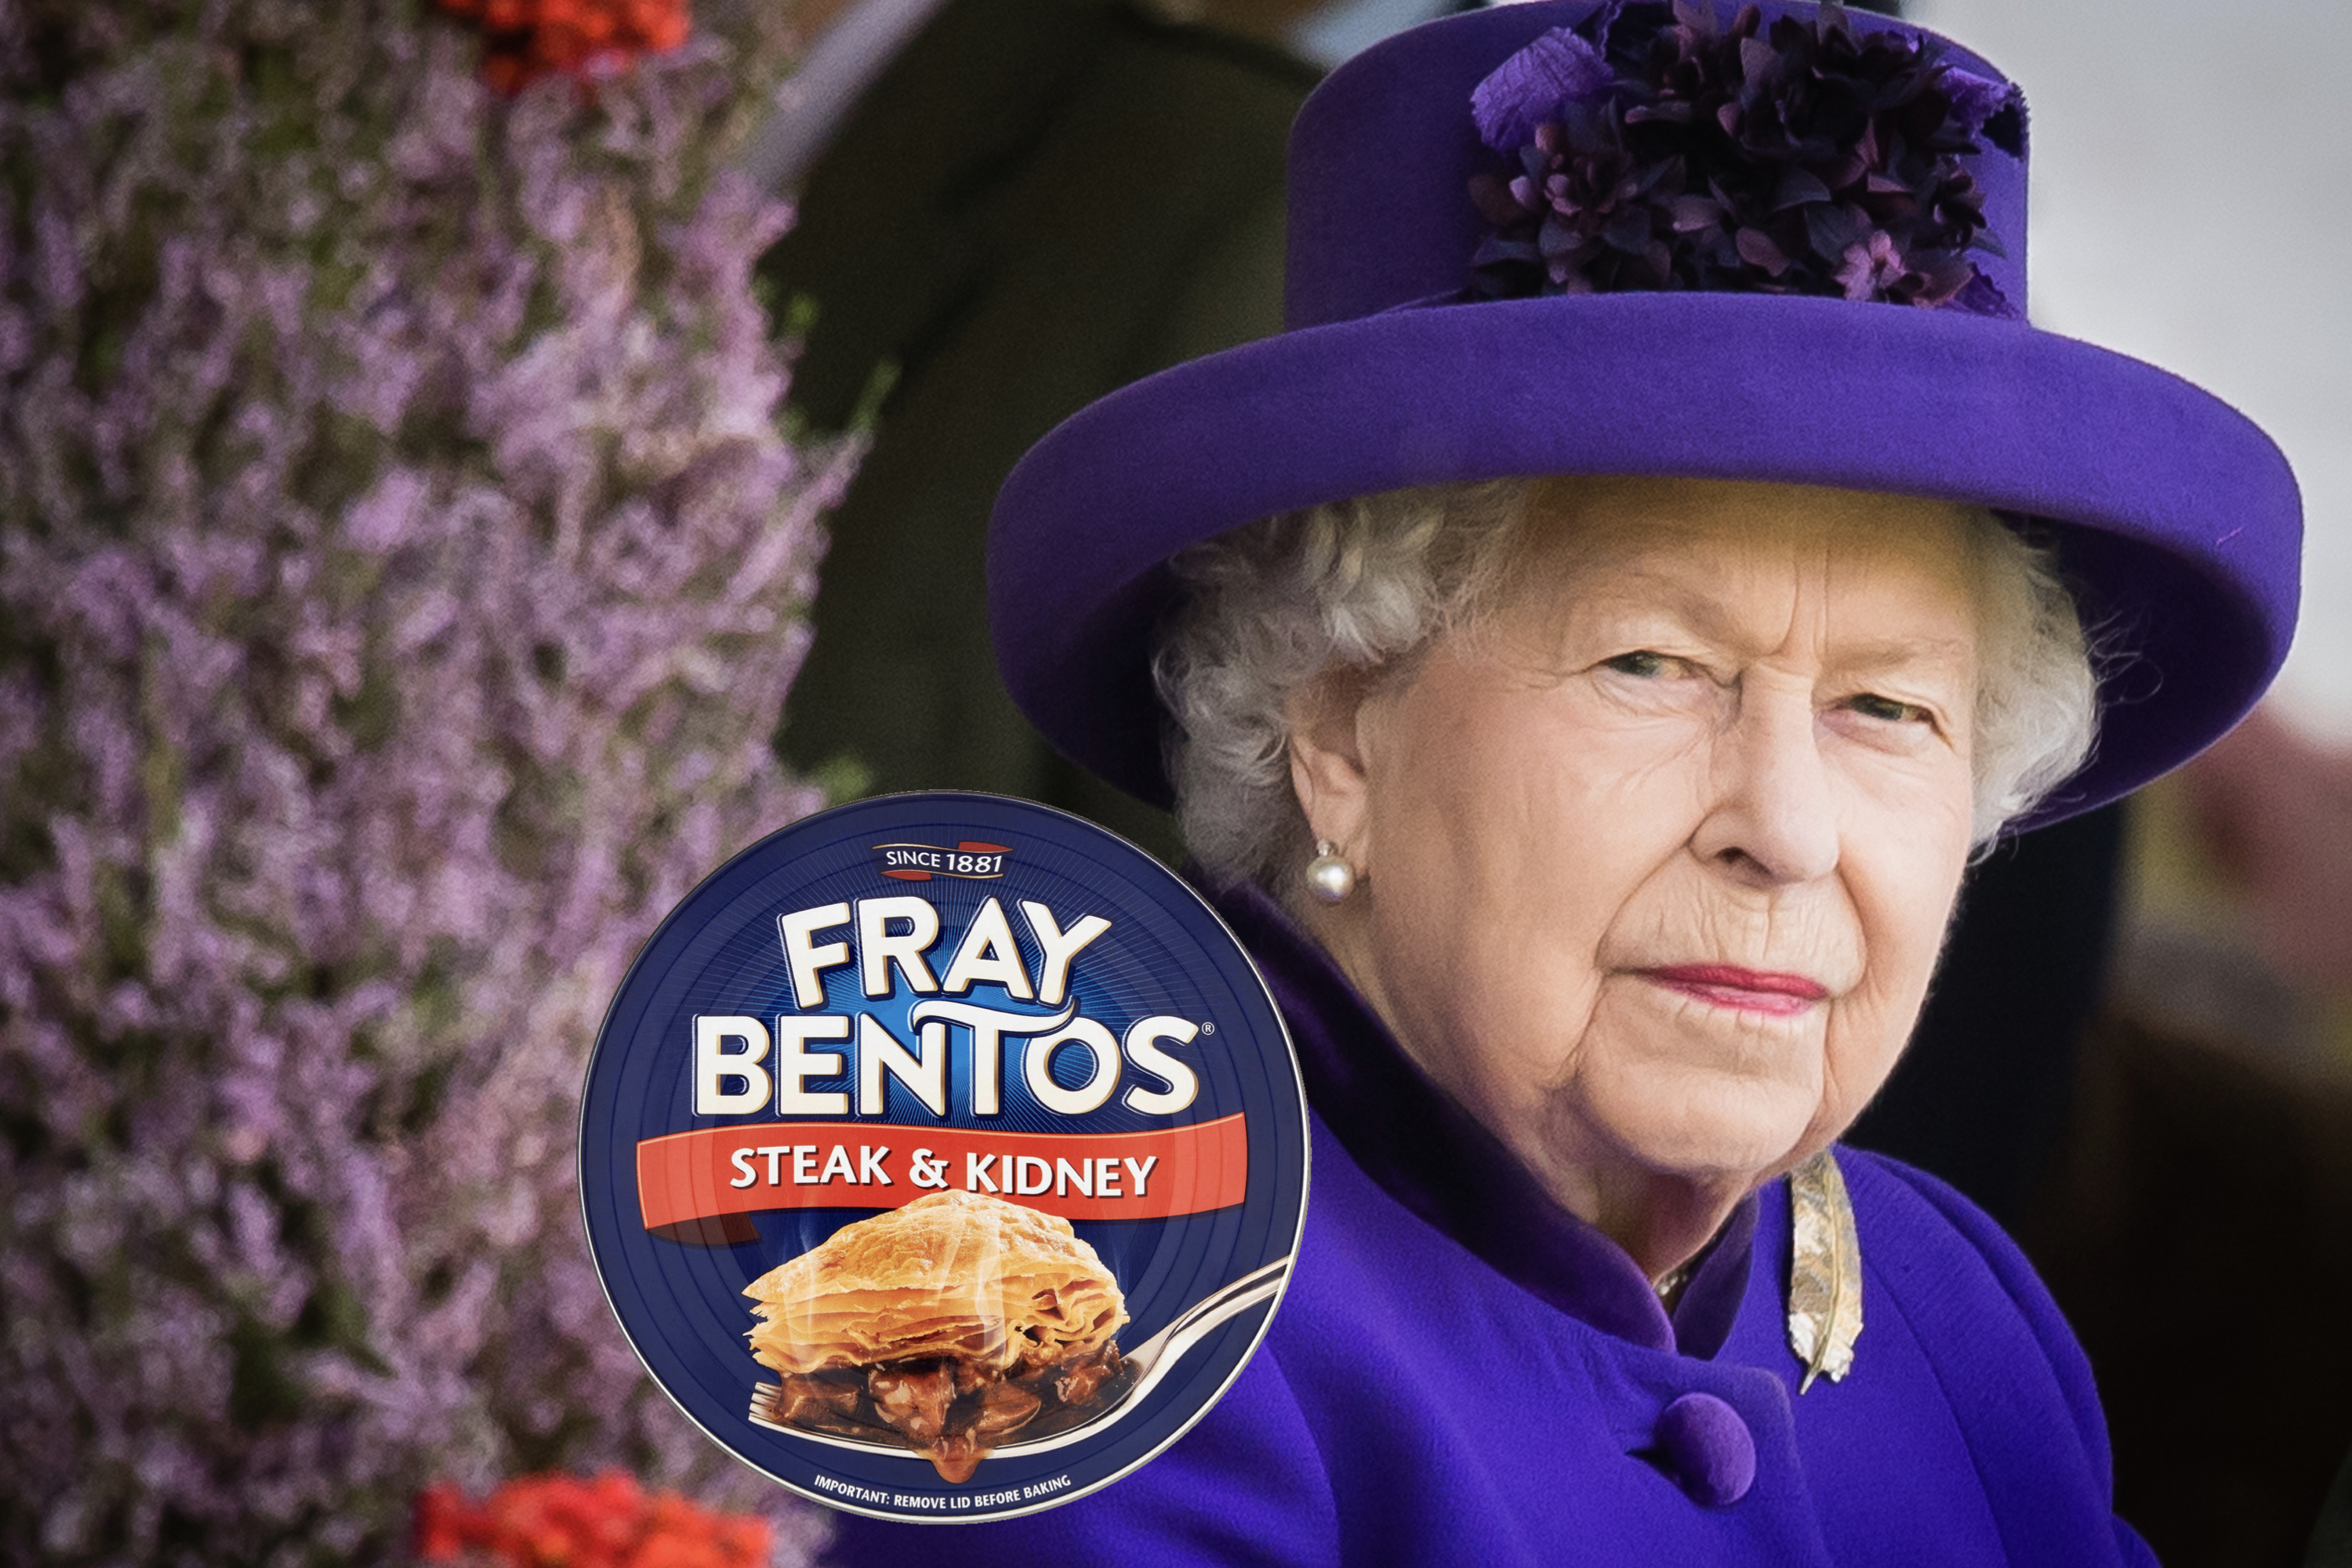 Queen Elizabeth II, wearing purple at an event in Scotland, with a Fray Bentos pie photoshopped in to illustrate her love of the pie on planes